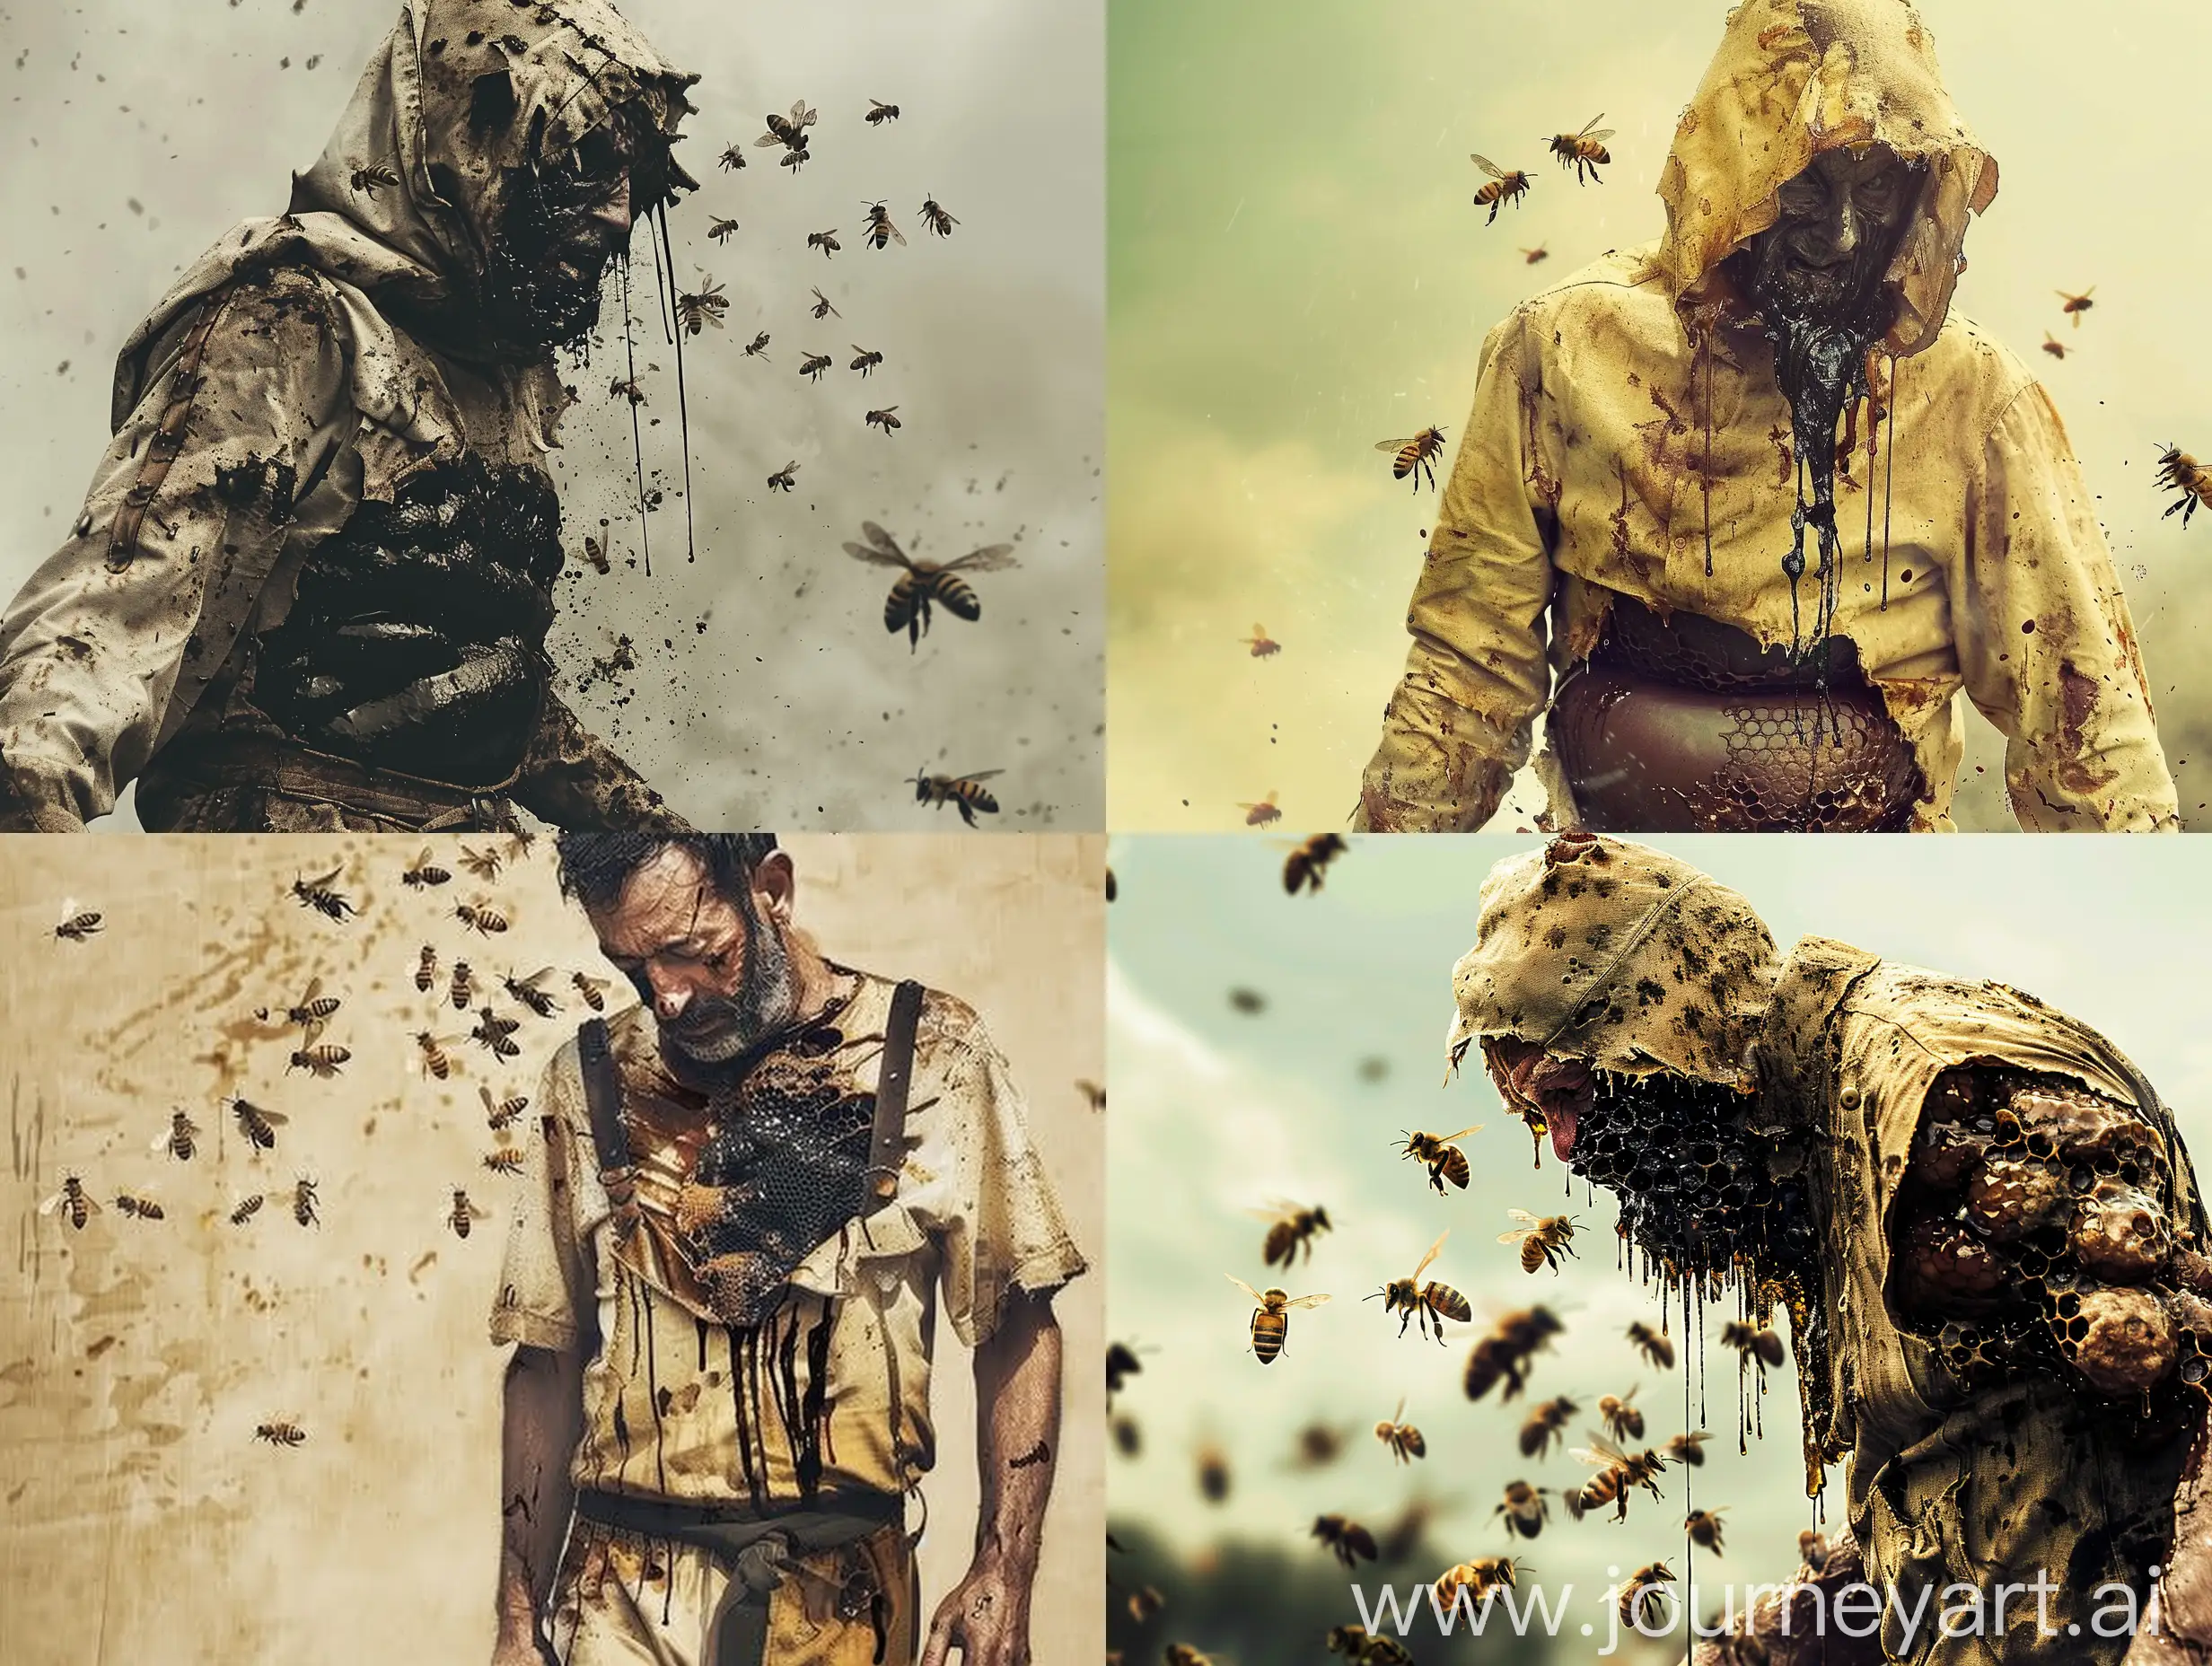 Eerie-Beekeeper-Covered-in-Dripping-Honey-Surrounded-by-Sinister-Bees